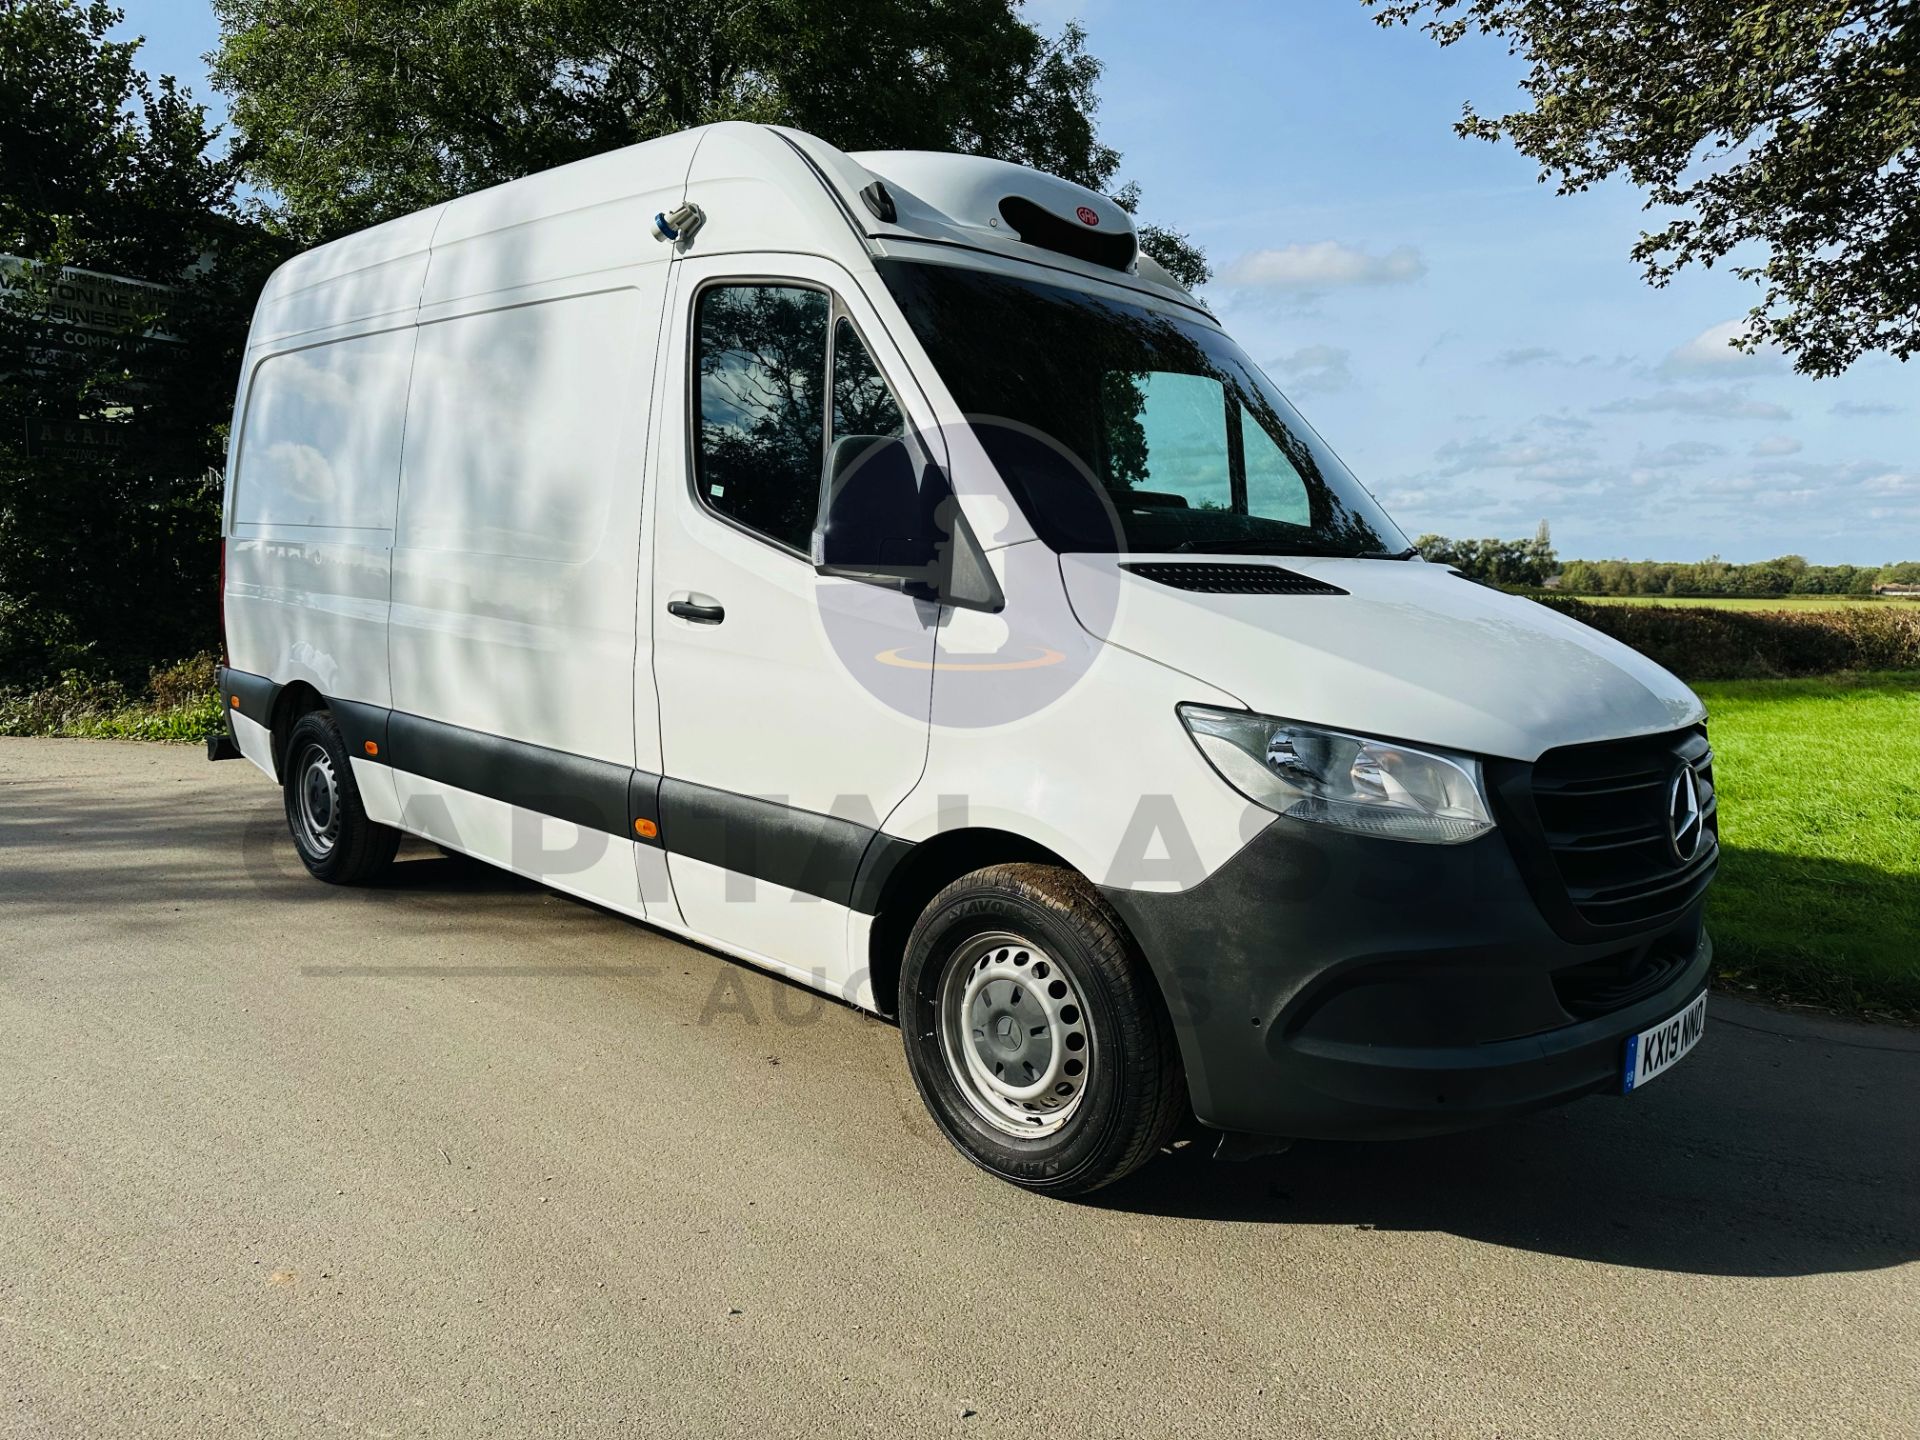 MERCEDES-BENZ SPRINTER 314 CDI *MWB - REFRIGERATED VAN* (2019 - FACELIFT MODEL) *OVERNIGHT STANDBY* - Image 2 of 44